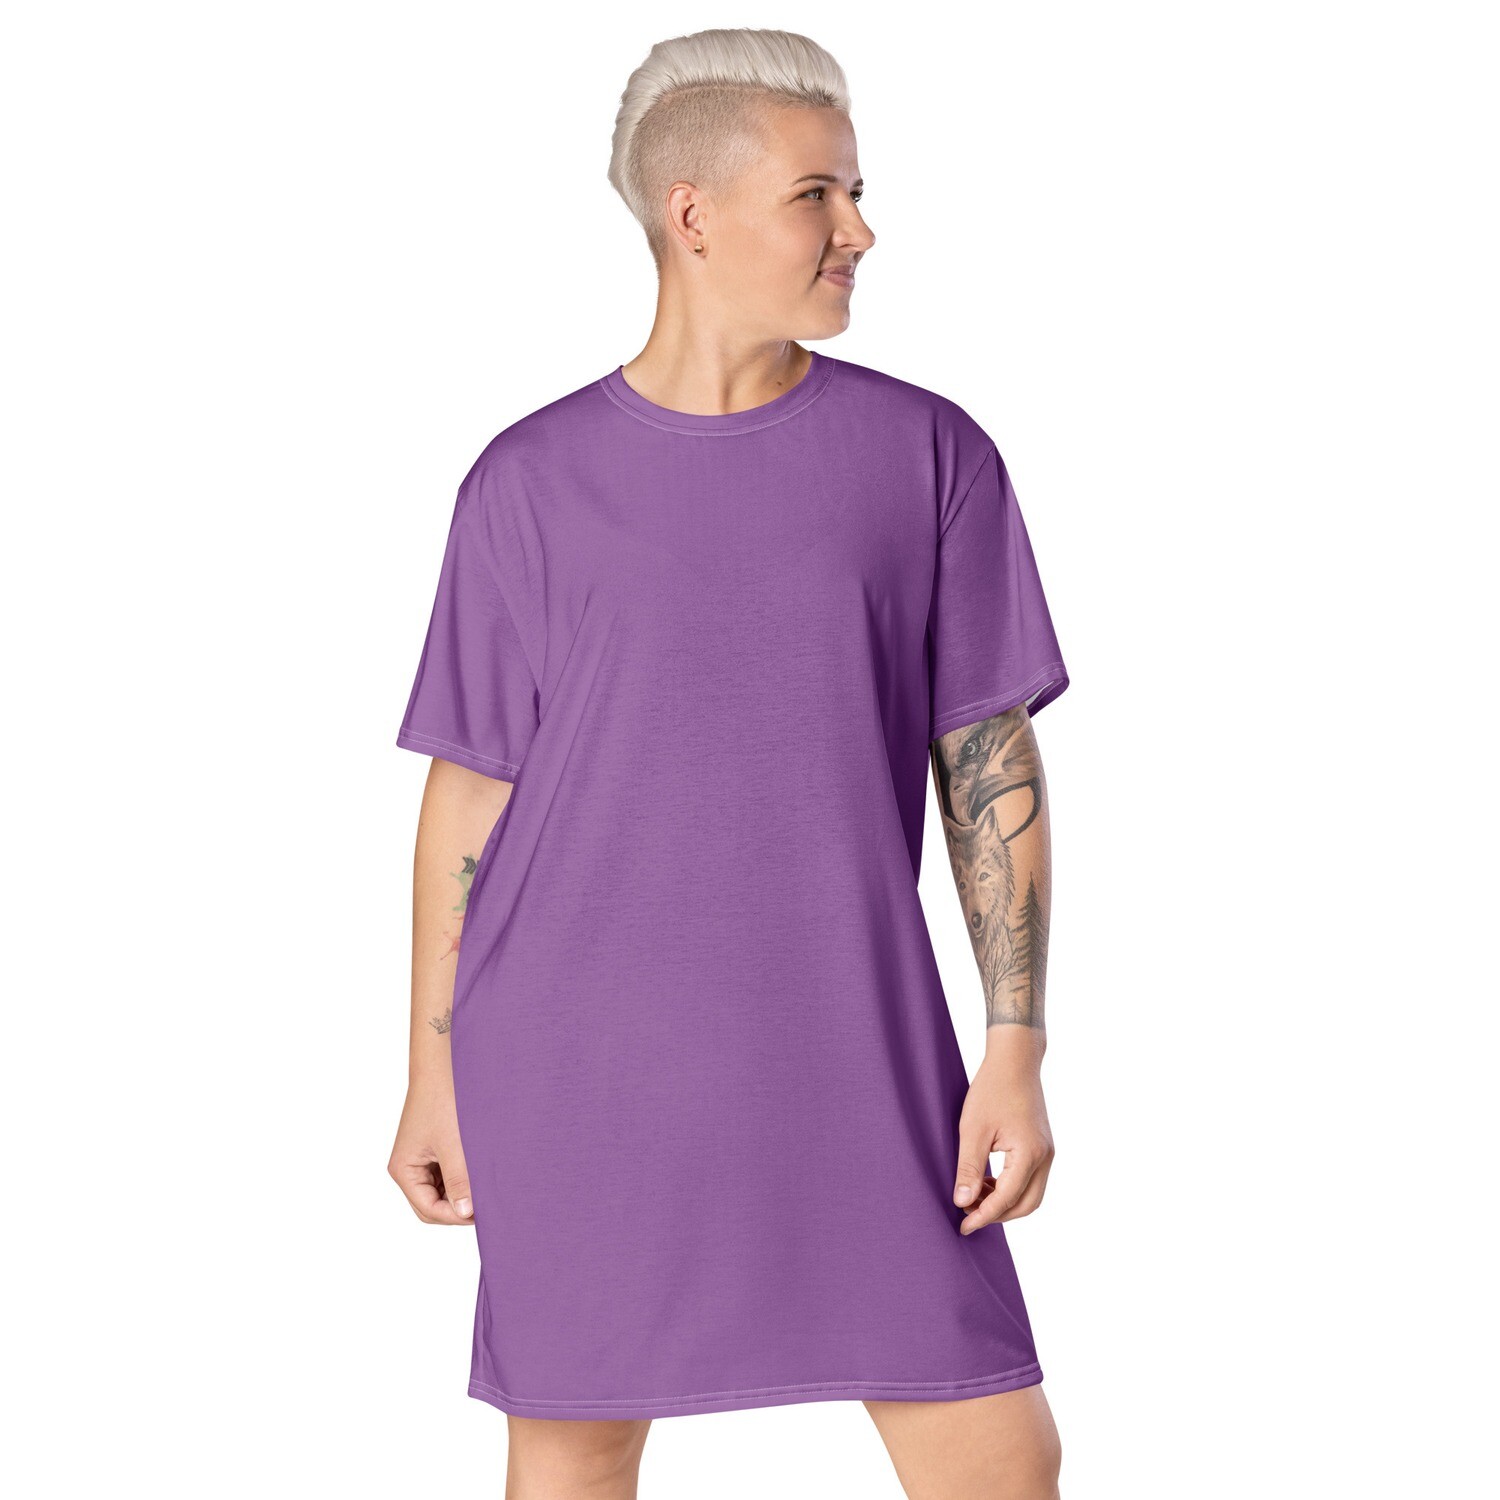 Purple baggy short sleeve t-shirt dress in sizes up to 6XL